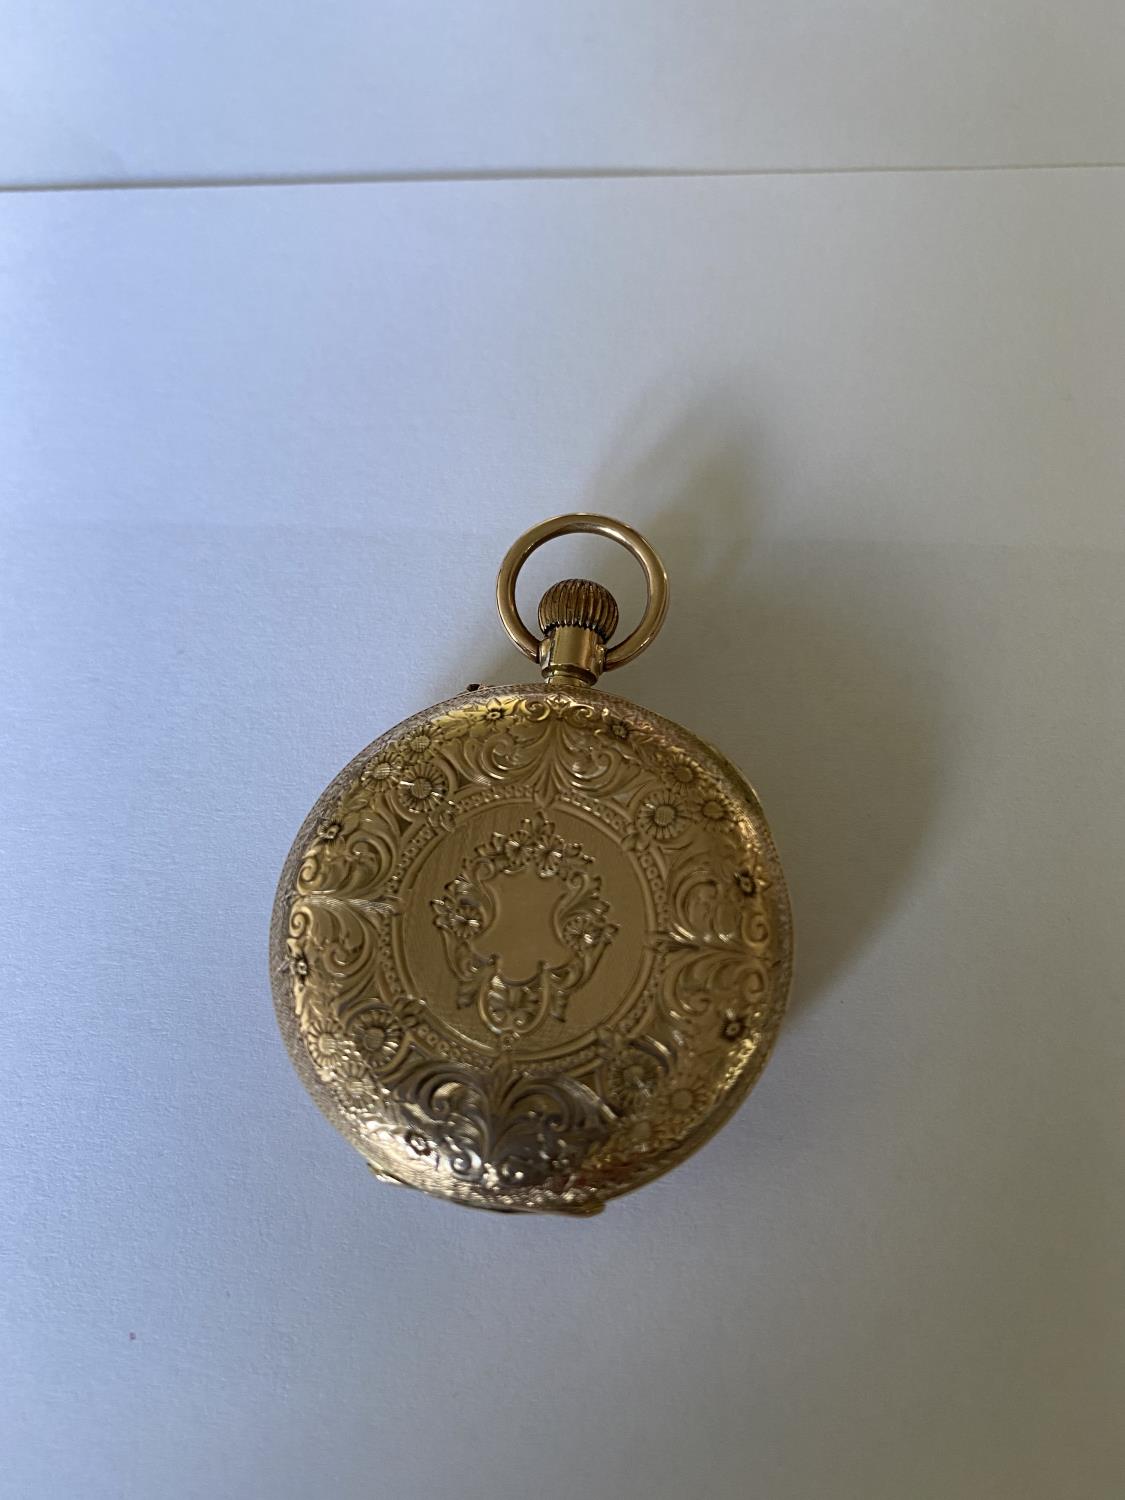 A LADIES T FATTORINI SWISS POCKET WATCH WITH 9 CARAT YELLOW GOLD CASE. WEIGHT 29.7 GRAMS, DIAMETER - Image 2 of 3